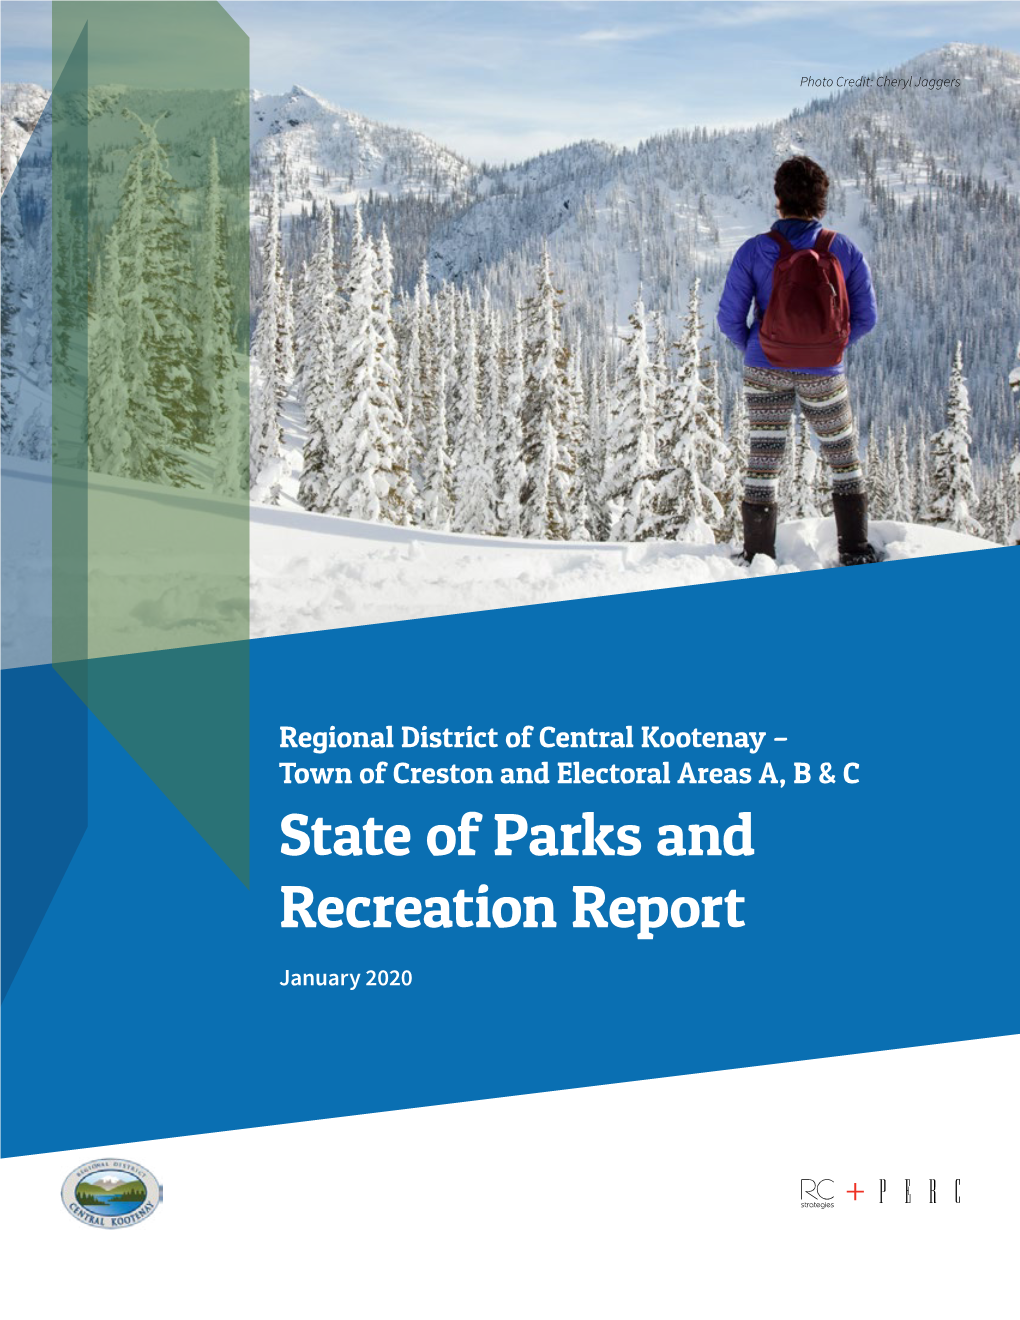 State of Parks and Recreation Report